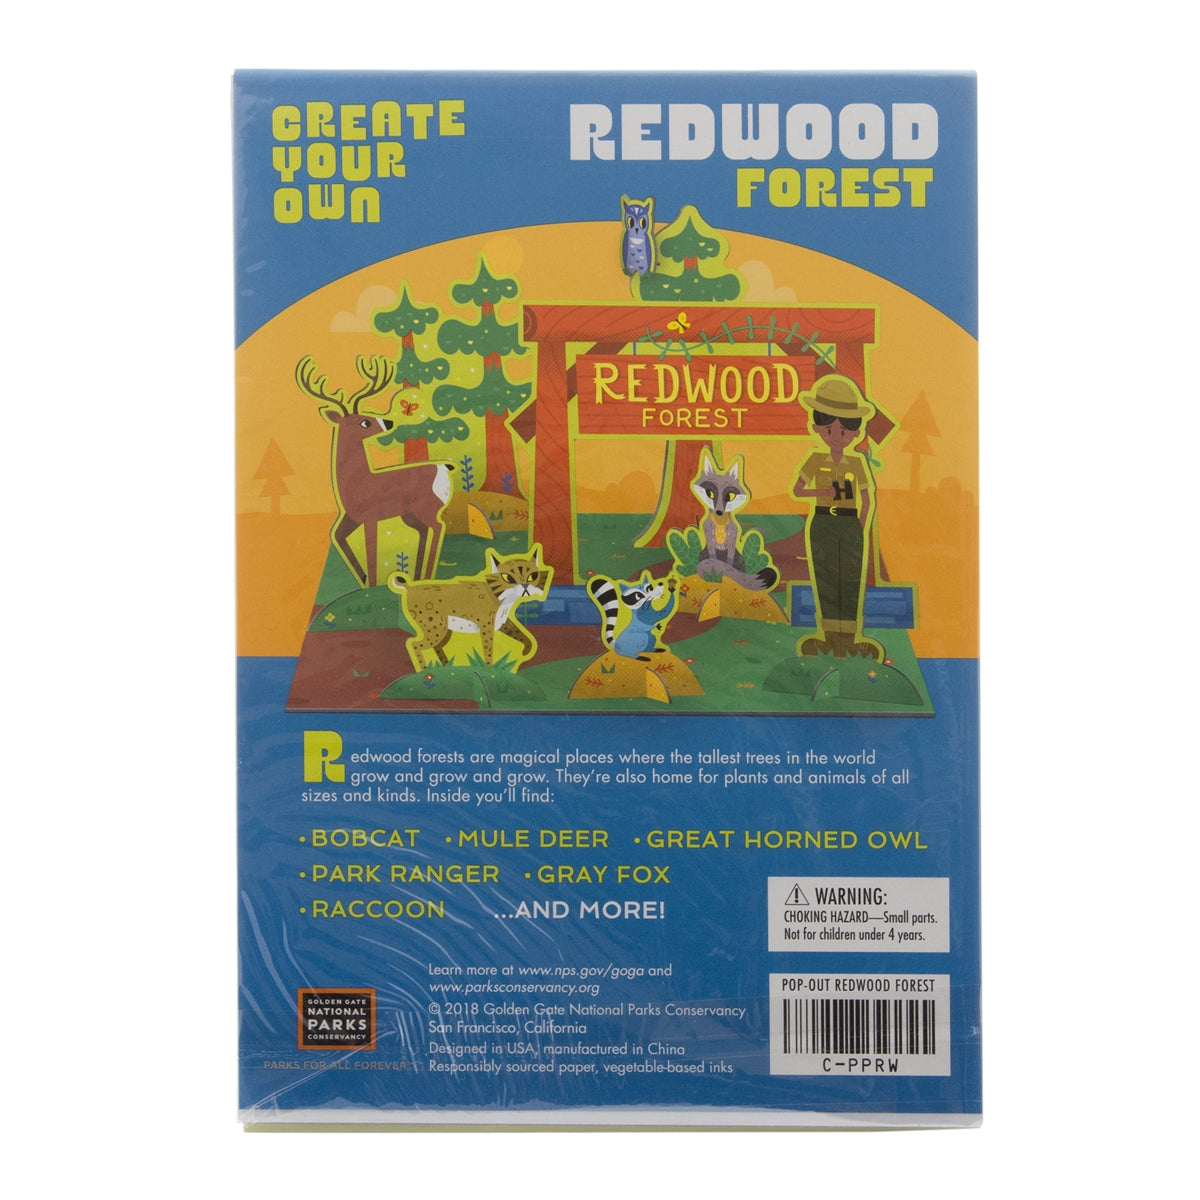 Flat-packed and packaged Redwood Forest Pop-out and Play kids activity kit, with puzzle pieces featuring colorful forest characters like a National Park Ranger, bobcat, deer, and raccoon.